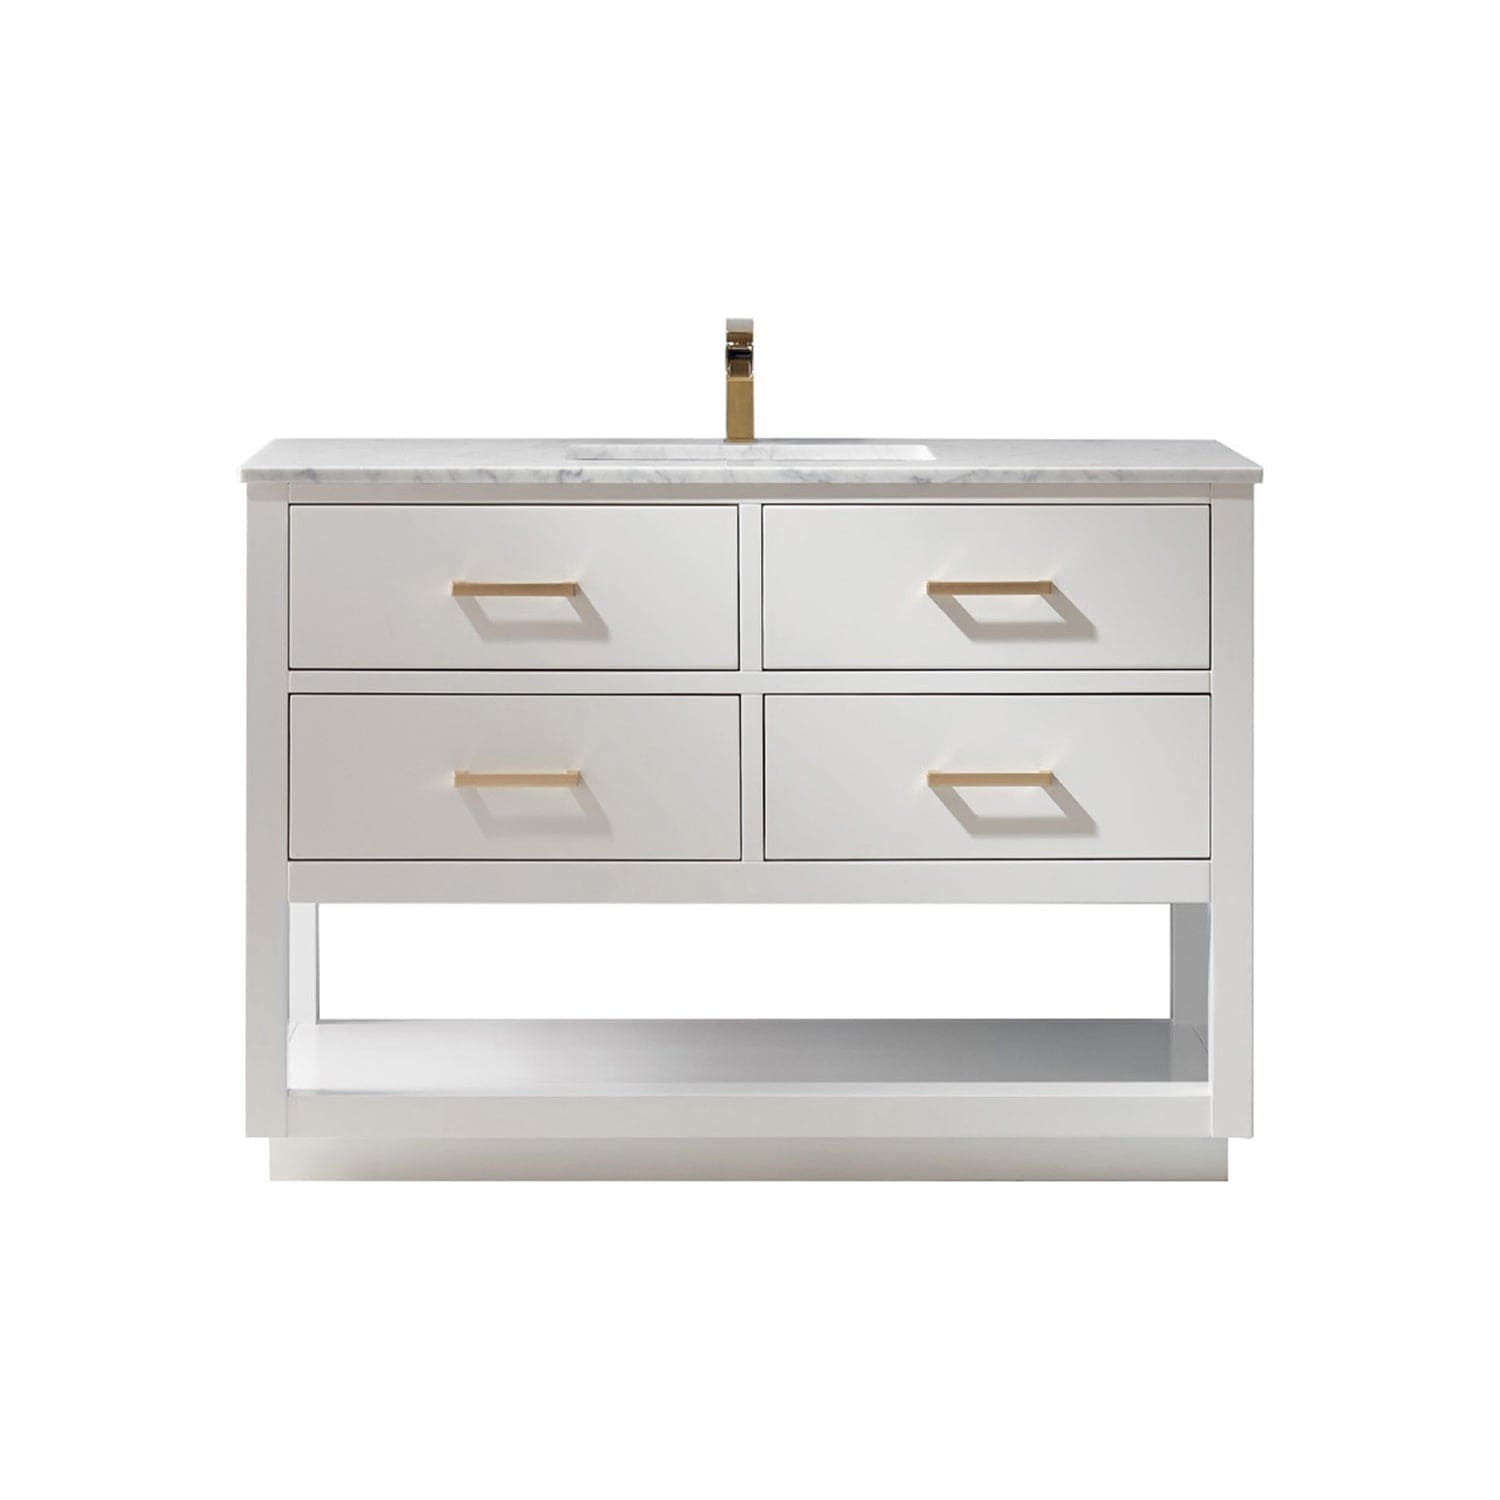 Altair Remi 48" Single Bathroom Vanity Set in White and Carrara White Marble Countertop without Mirror 532048-WH-CA-NM - Molaix631112971508Vanity532048-WH-CA-NM